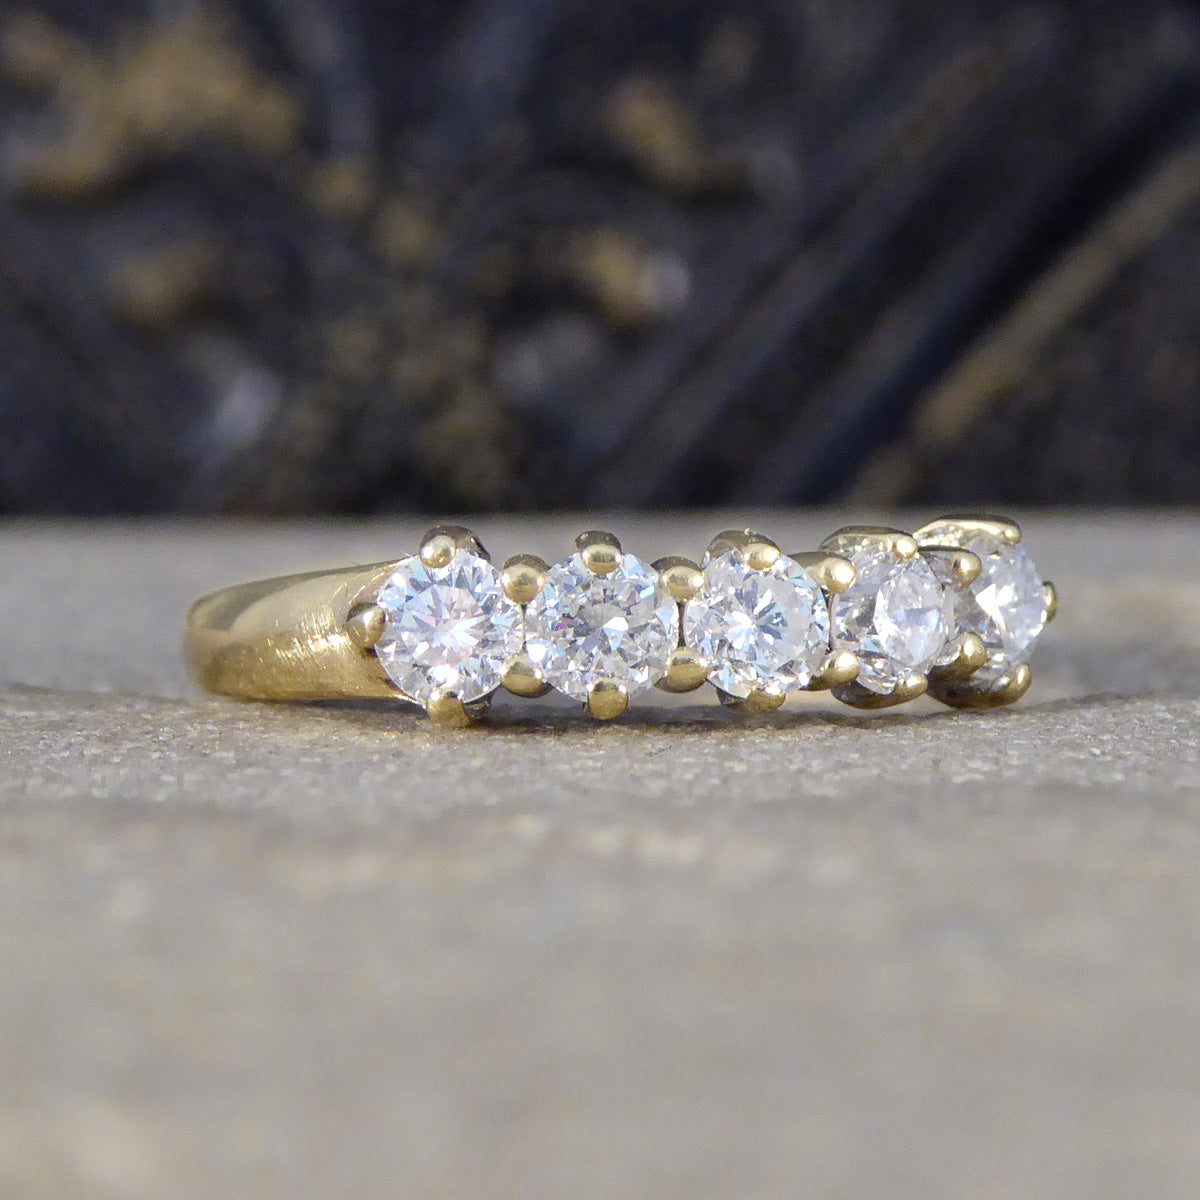 Vintage Five Stone Diamond Ring in 18ct Yellow Gold